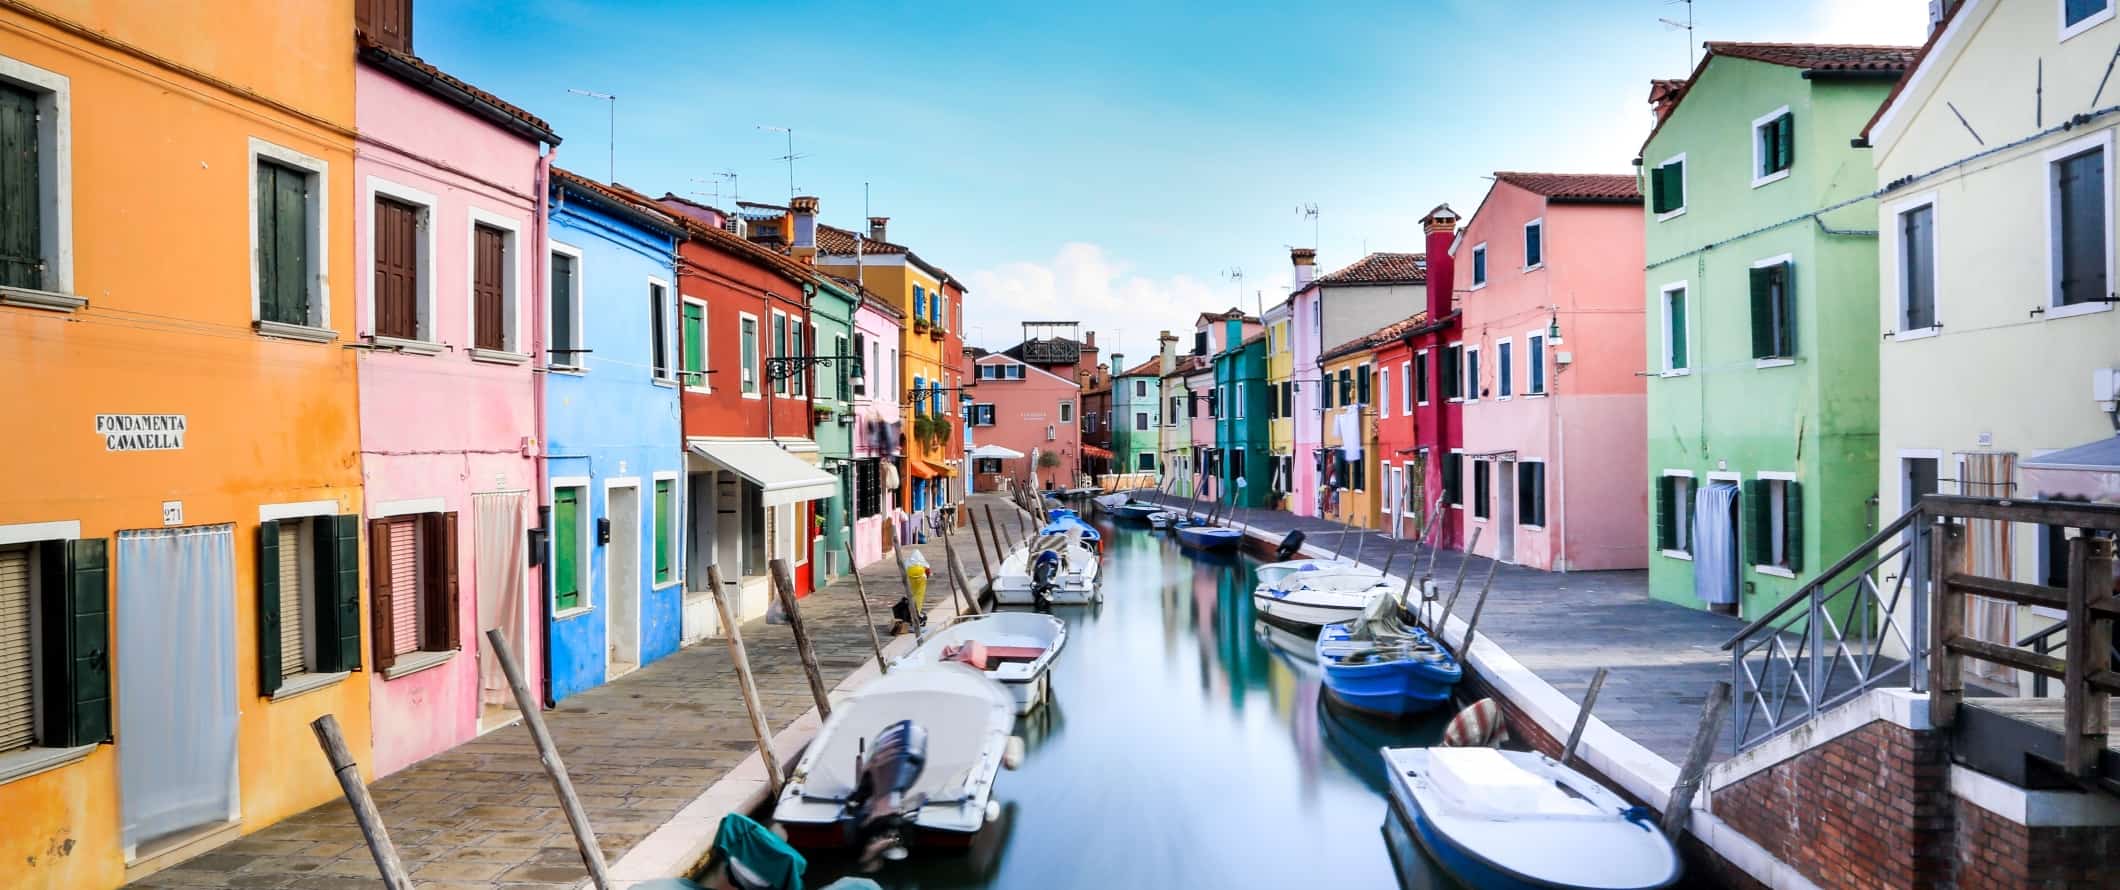 Colorful buildings along the canal in Burano, an island near Venice, Italy.